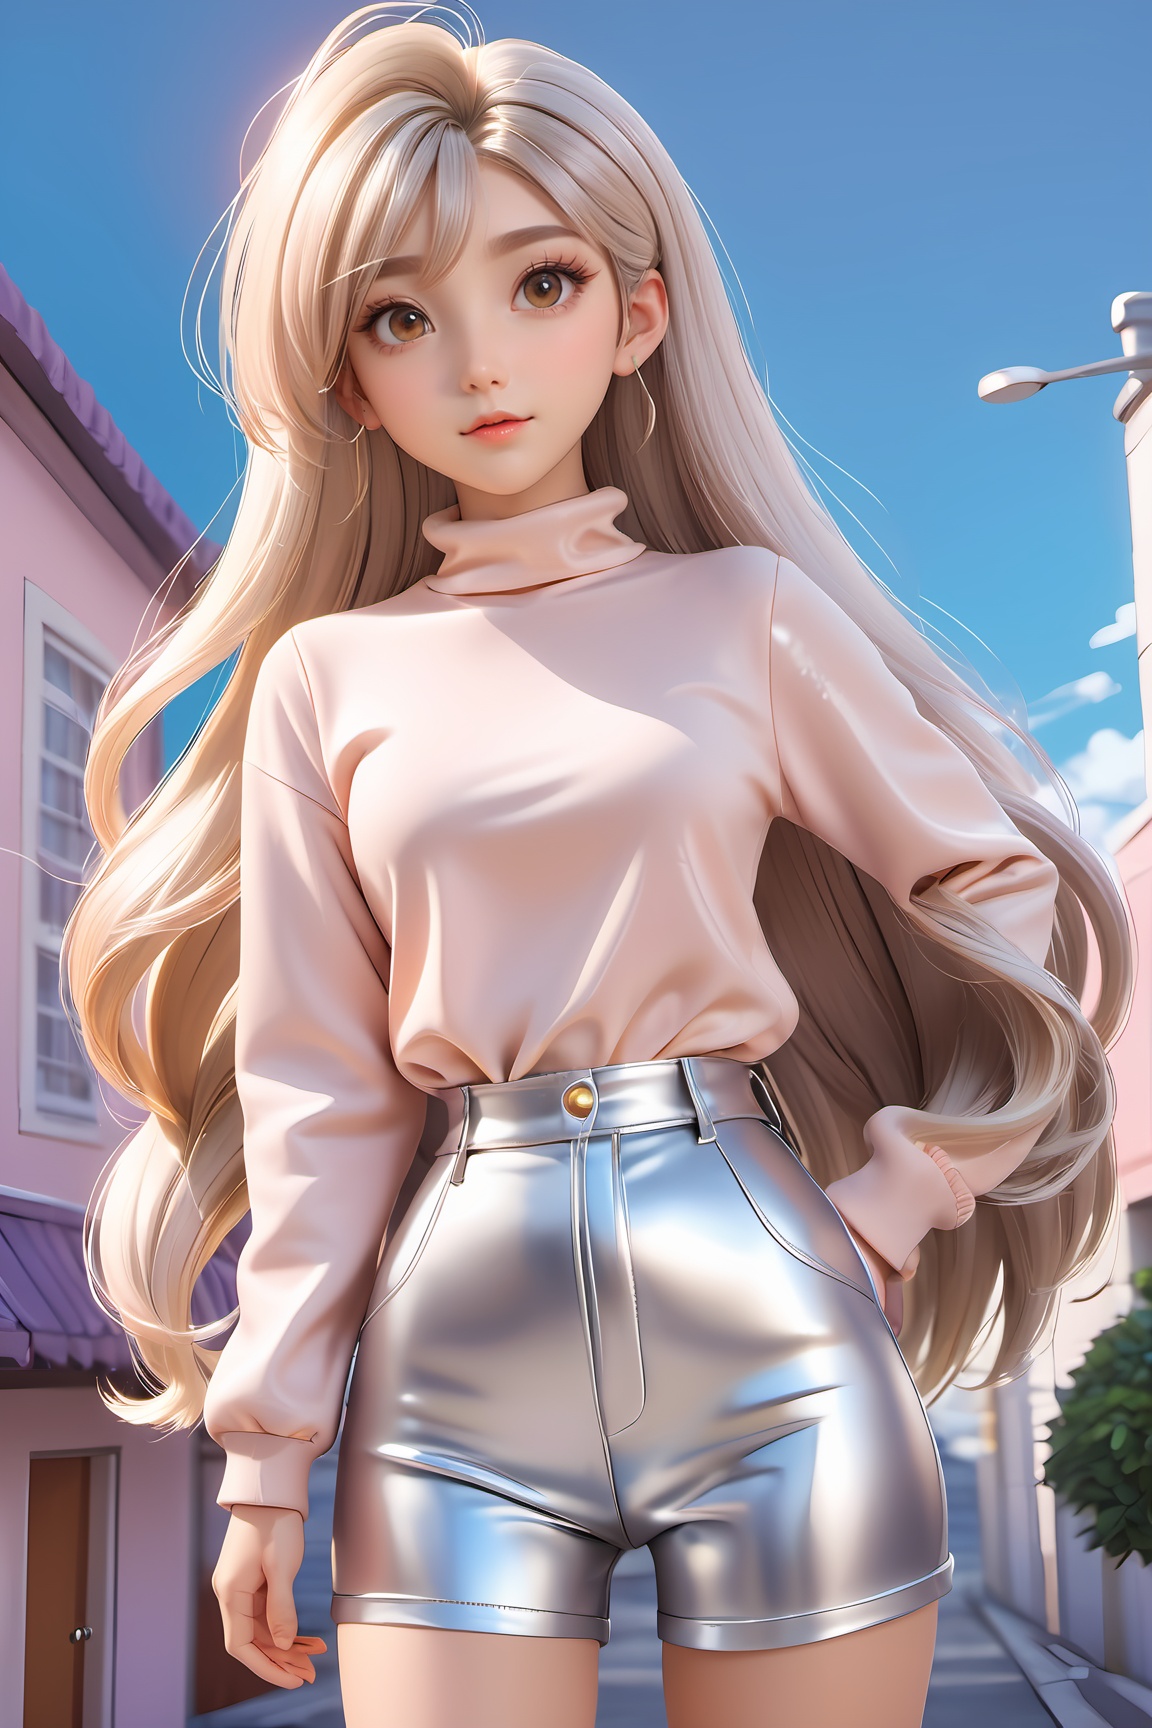  anime artwork pixar,3d style,toon,masterpiece,best quality,good shine,OC rendering,best quality,4K,super detail,1girl,((full body)),looking at viewer,standing,shiny_skin,fair_skin,Celine leather trousers with a high waist and tapered leg,light oyster white hair,gyaru,absolute_territory,tight,spandex,shoes,kneehighs,glamor,dormitory,light grey background,clean background,straight_hair,hime cut, . anime style, key visual, vibrant, studio anime, highly detailed, doll, 3d toon style